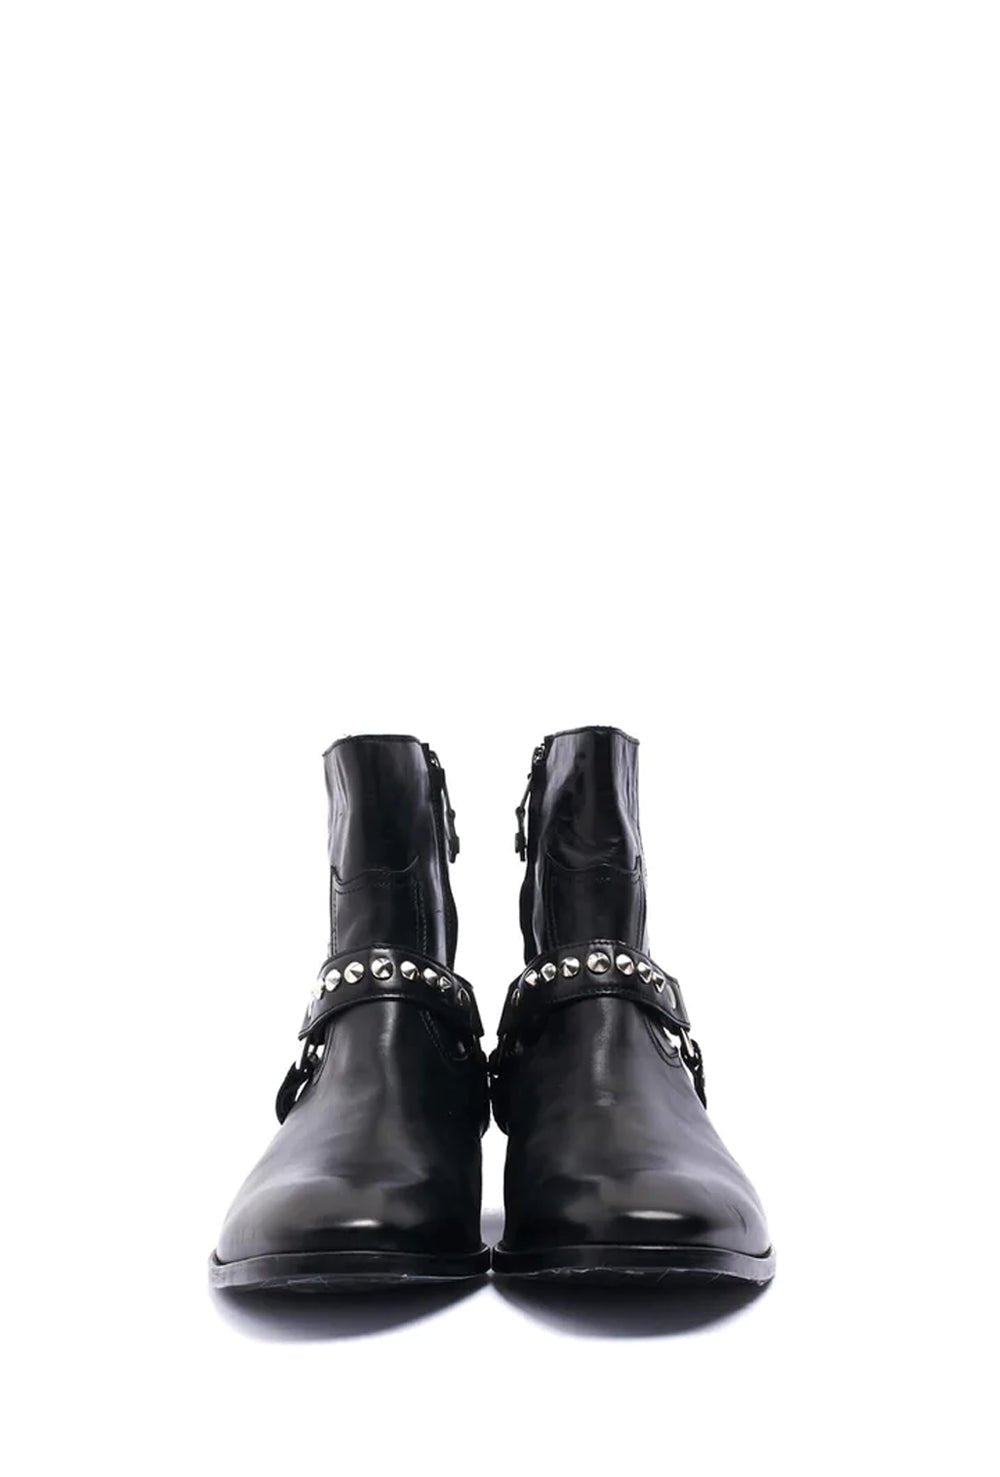 RING BOOT Black leather boots with studded strap, leather sole, made in Italy. HTC LOS ANGELES